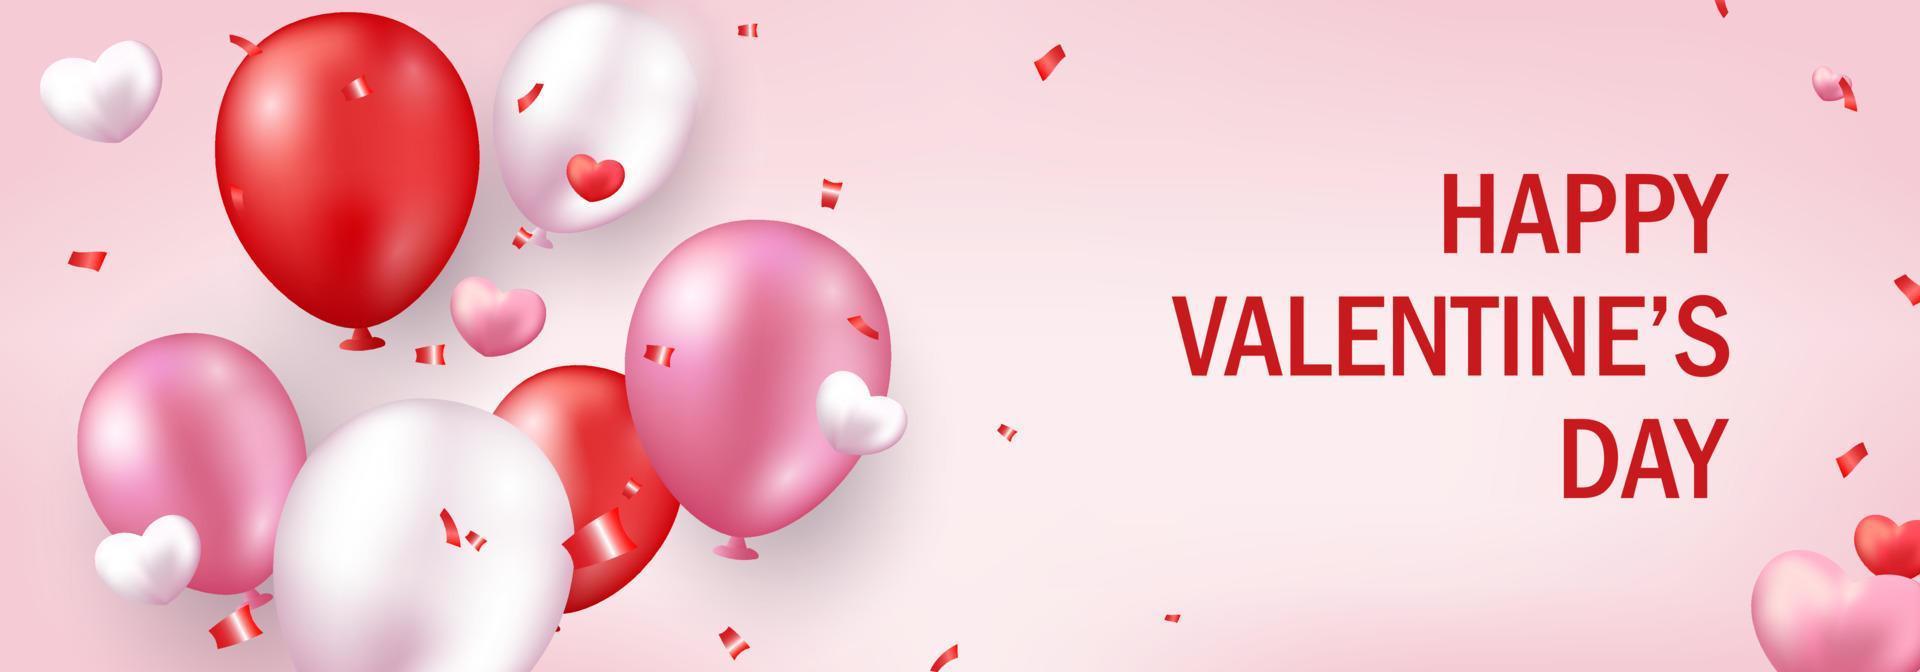 Valentines Day banner. Romantic design with realistic festive objects, realistic balloons, hearts, glitter confetti. Festive Horizontal poster vector